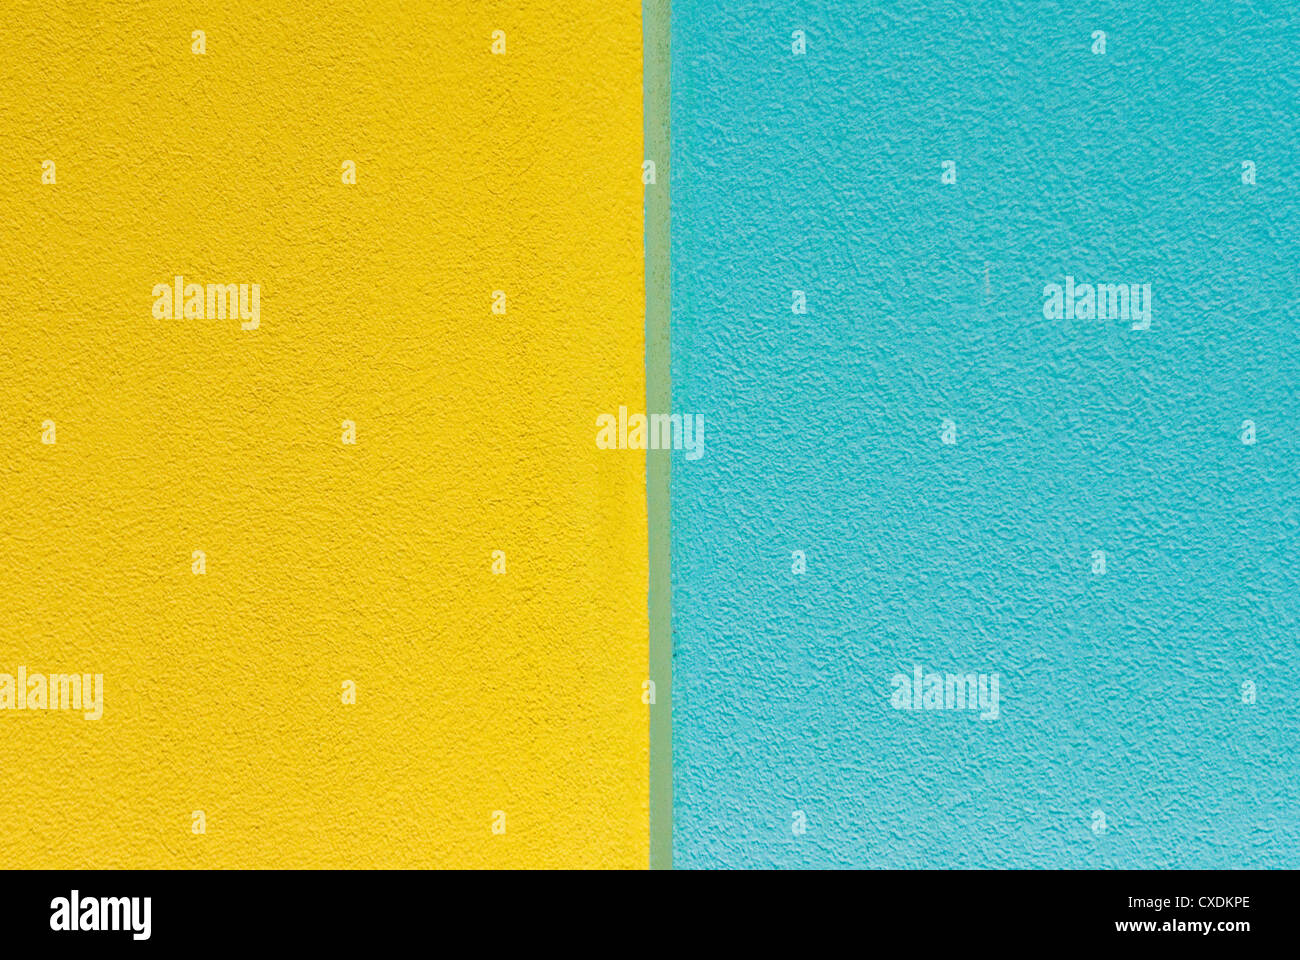 Wall of blue and yellow textured paint Stock Photo